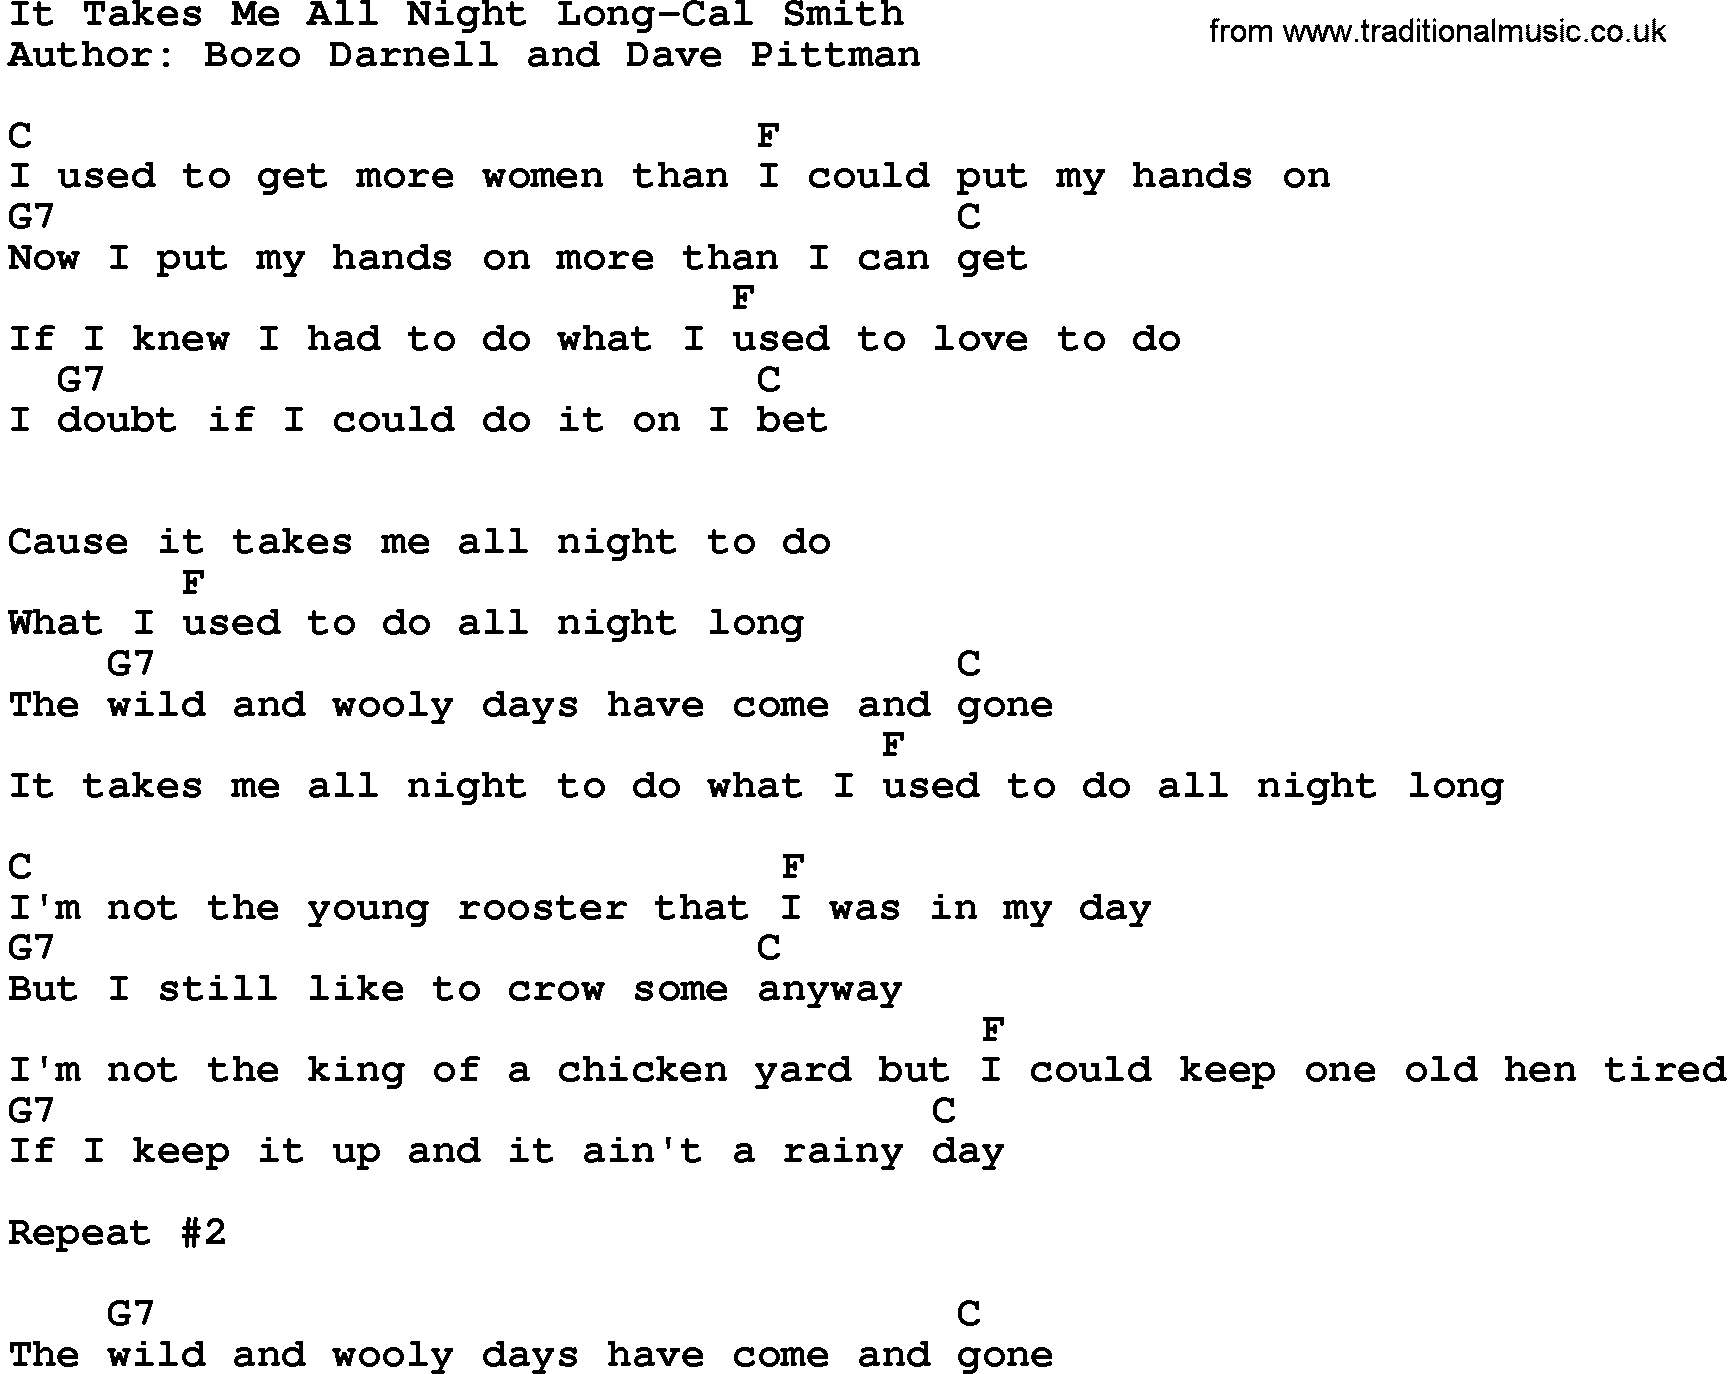 Country music song: It Takes Me All Night Long-Cal Smith lyrics and chords